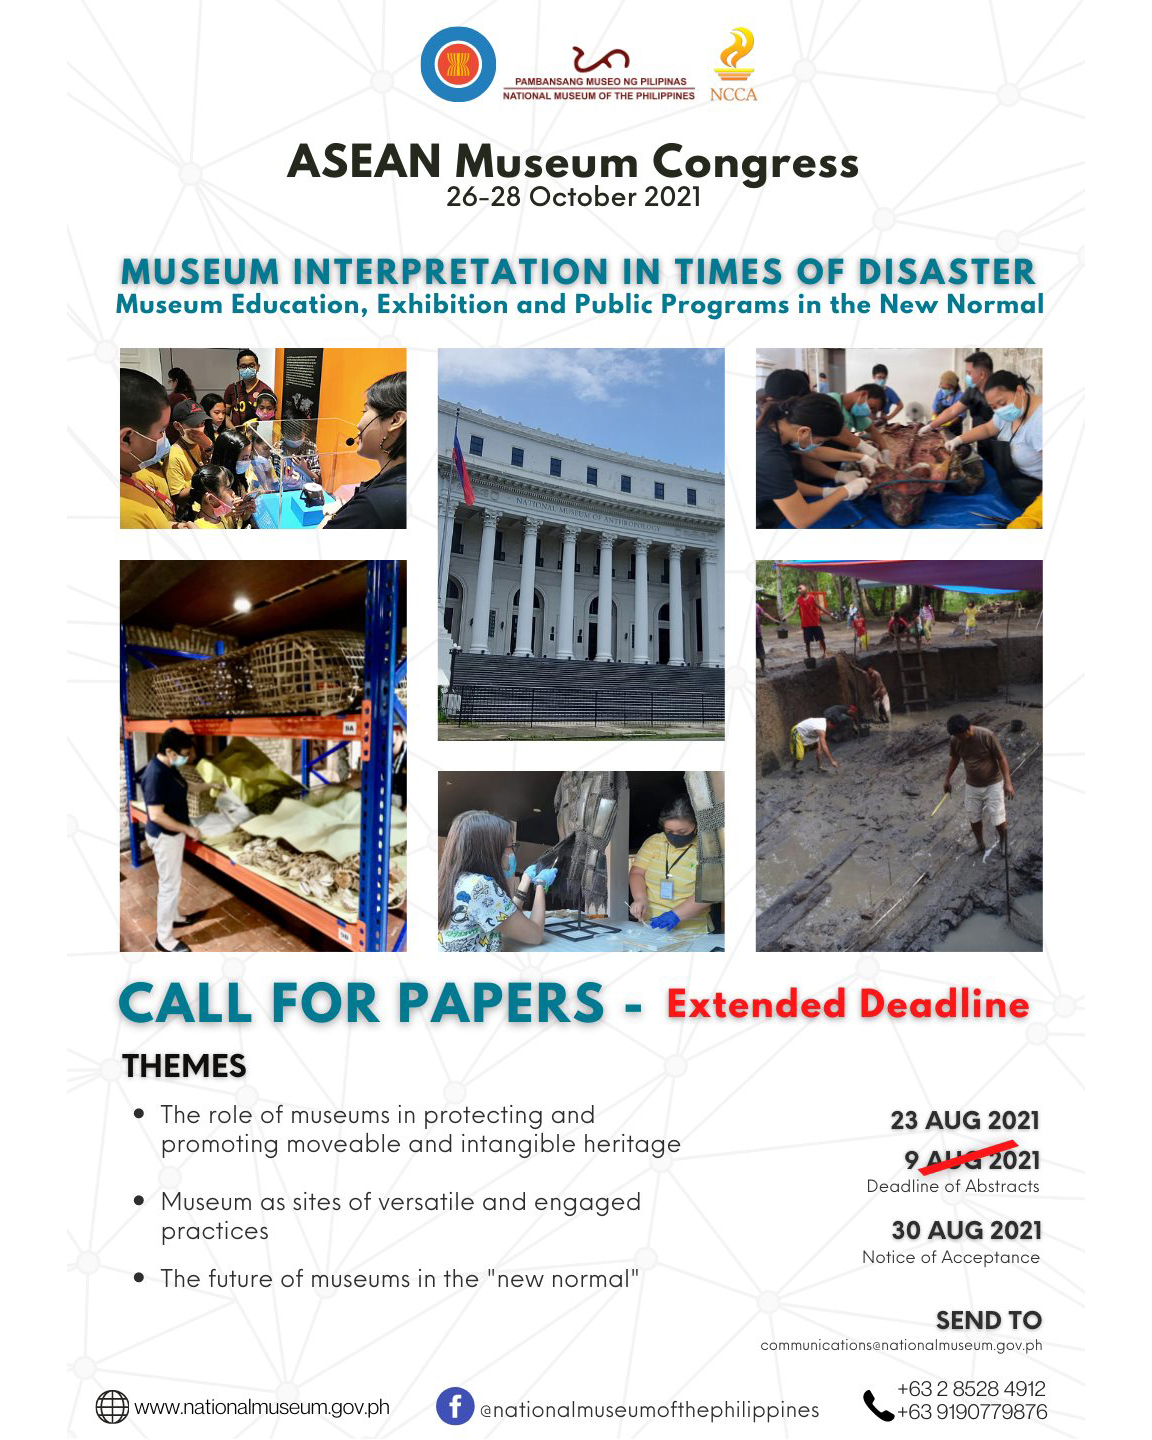 CALL FOR PAPERS: ASEAN MUSEUM CONGRESS 2021